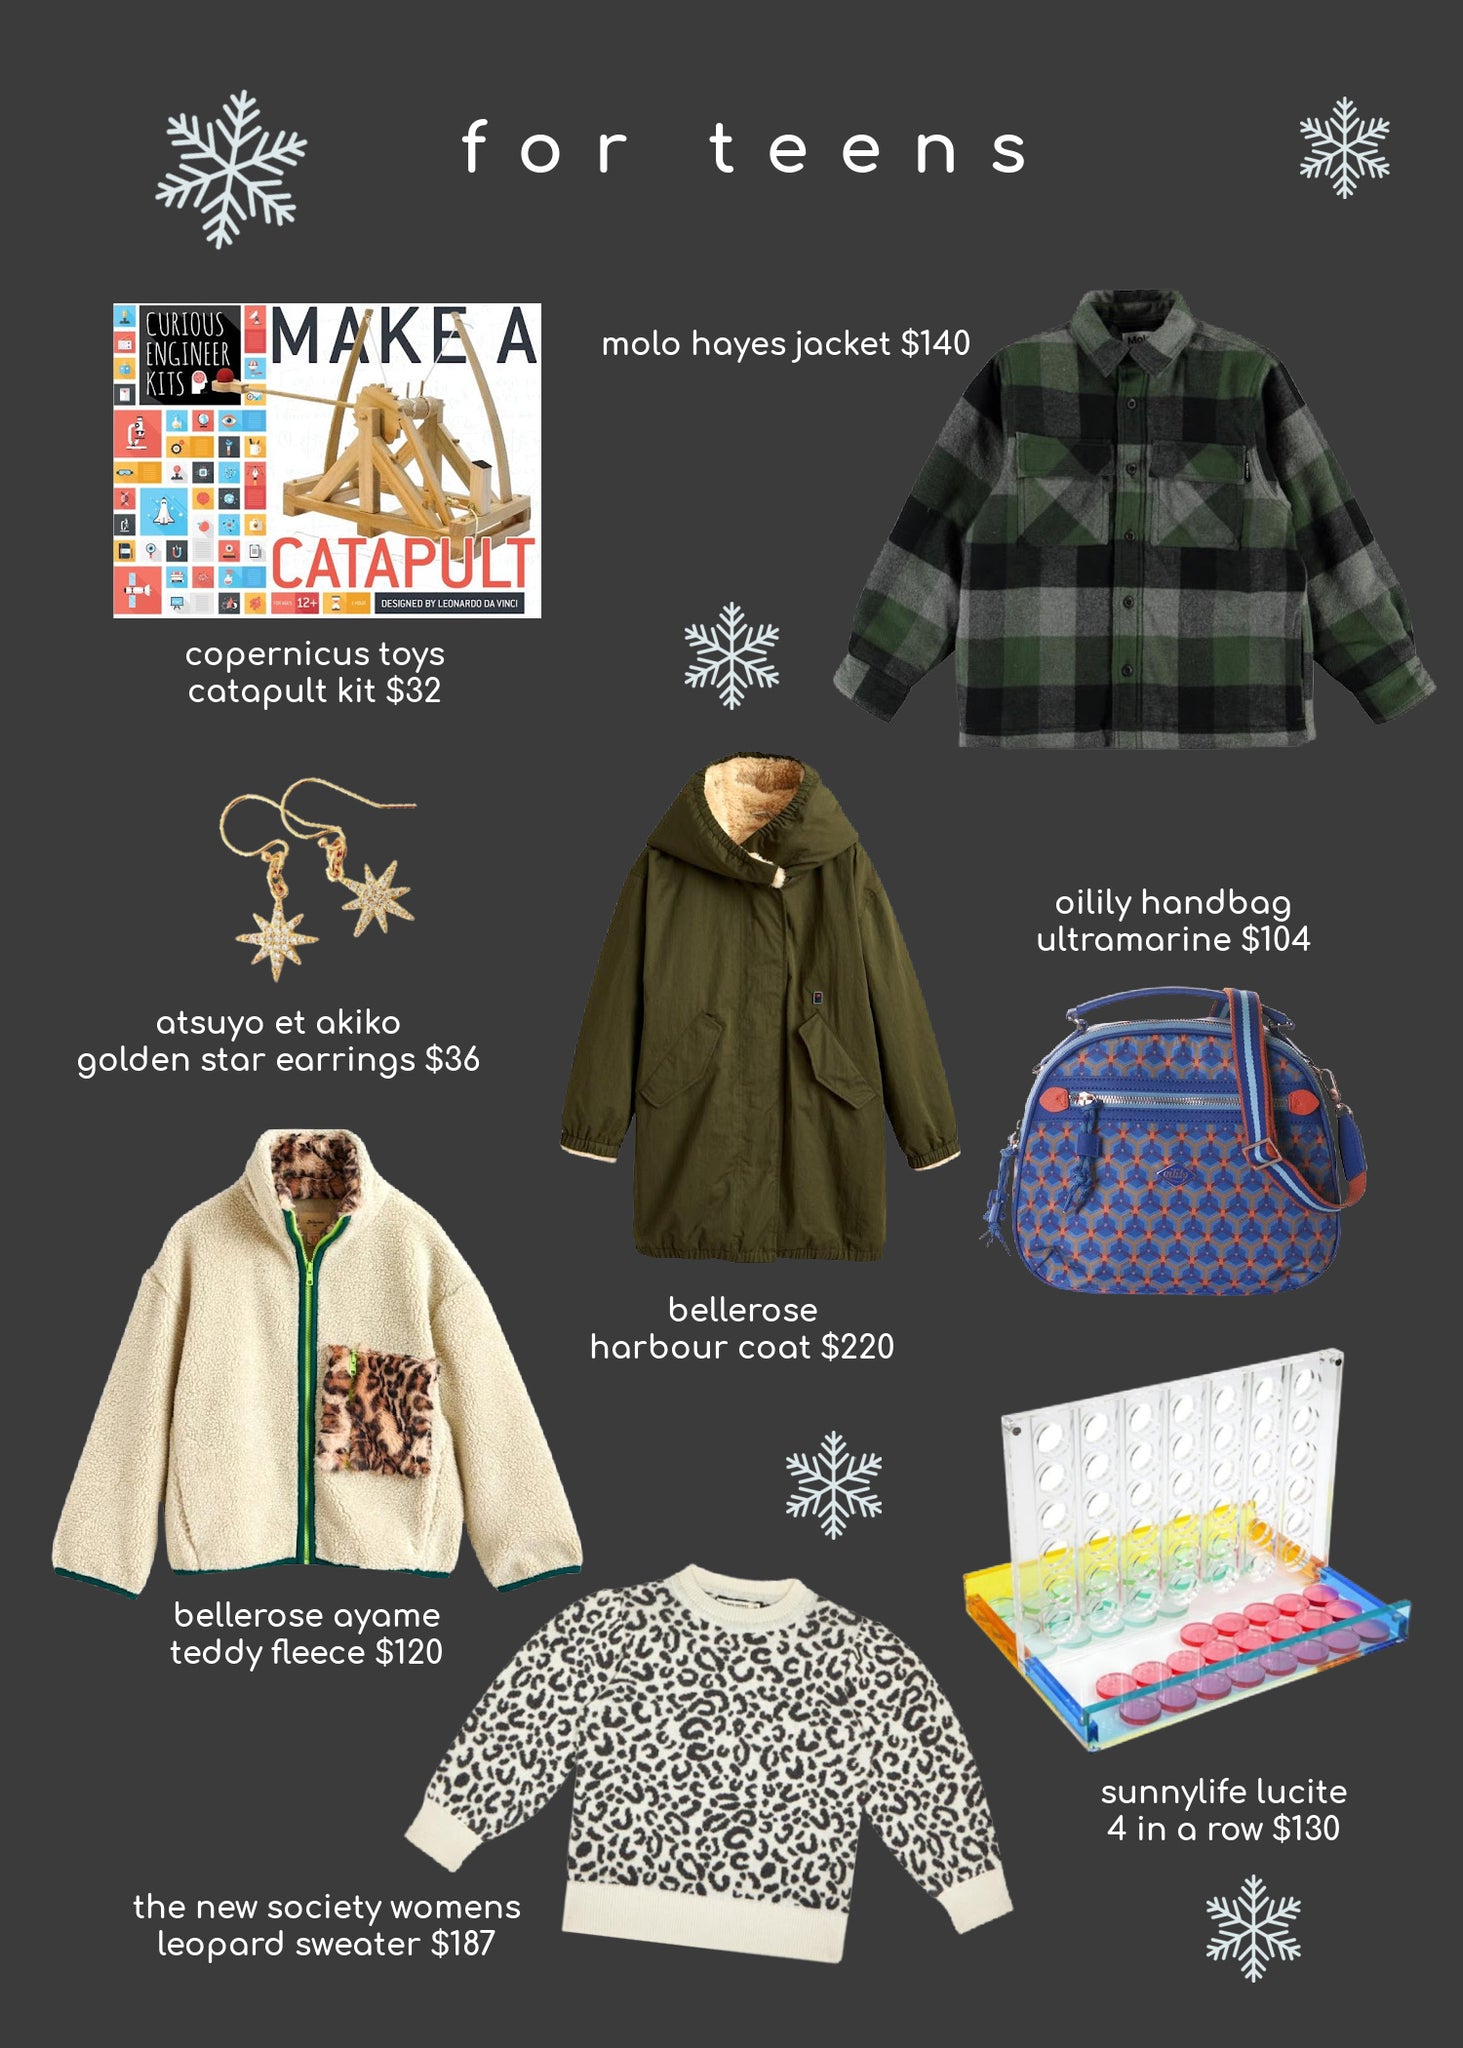 holiday gift ideas for teens